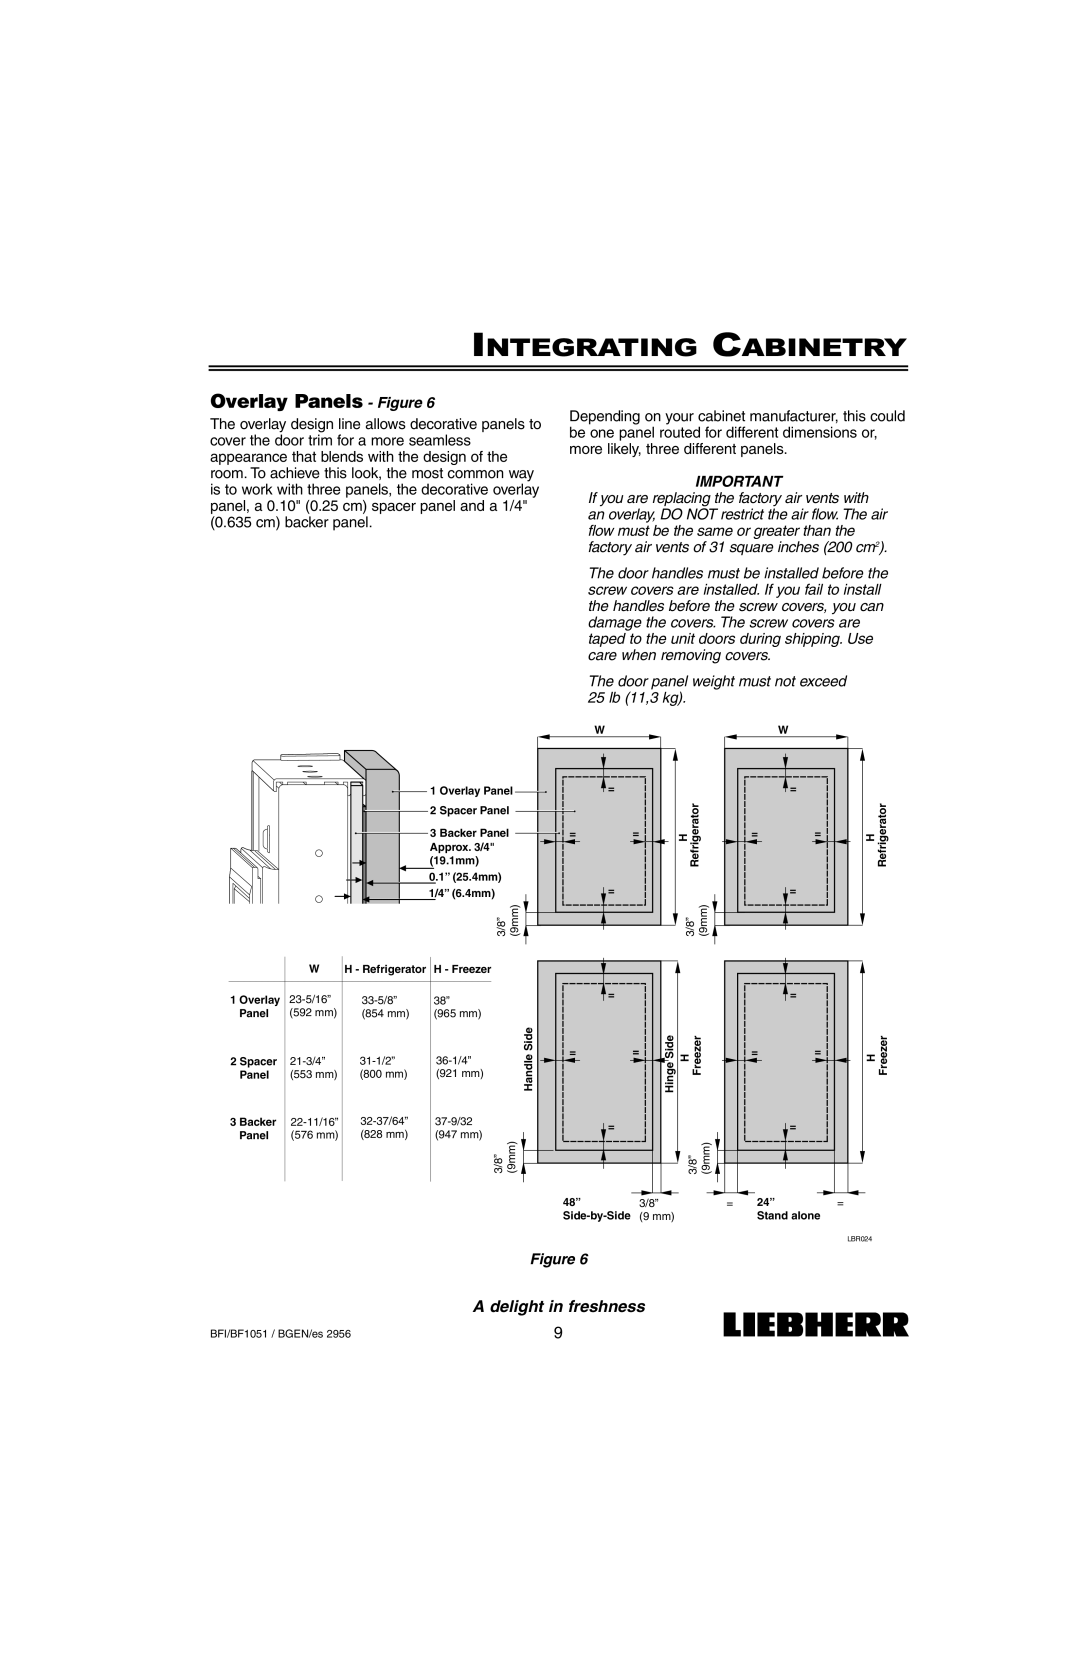 Liebherr BF1051, BFI1051 installation instructions Overlay Panels - Figure, Integrating Cabinetry, A delight in freshness 